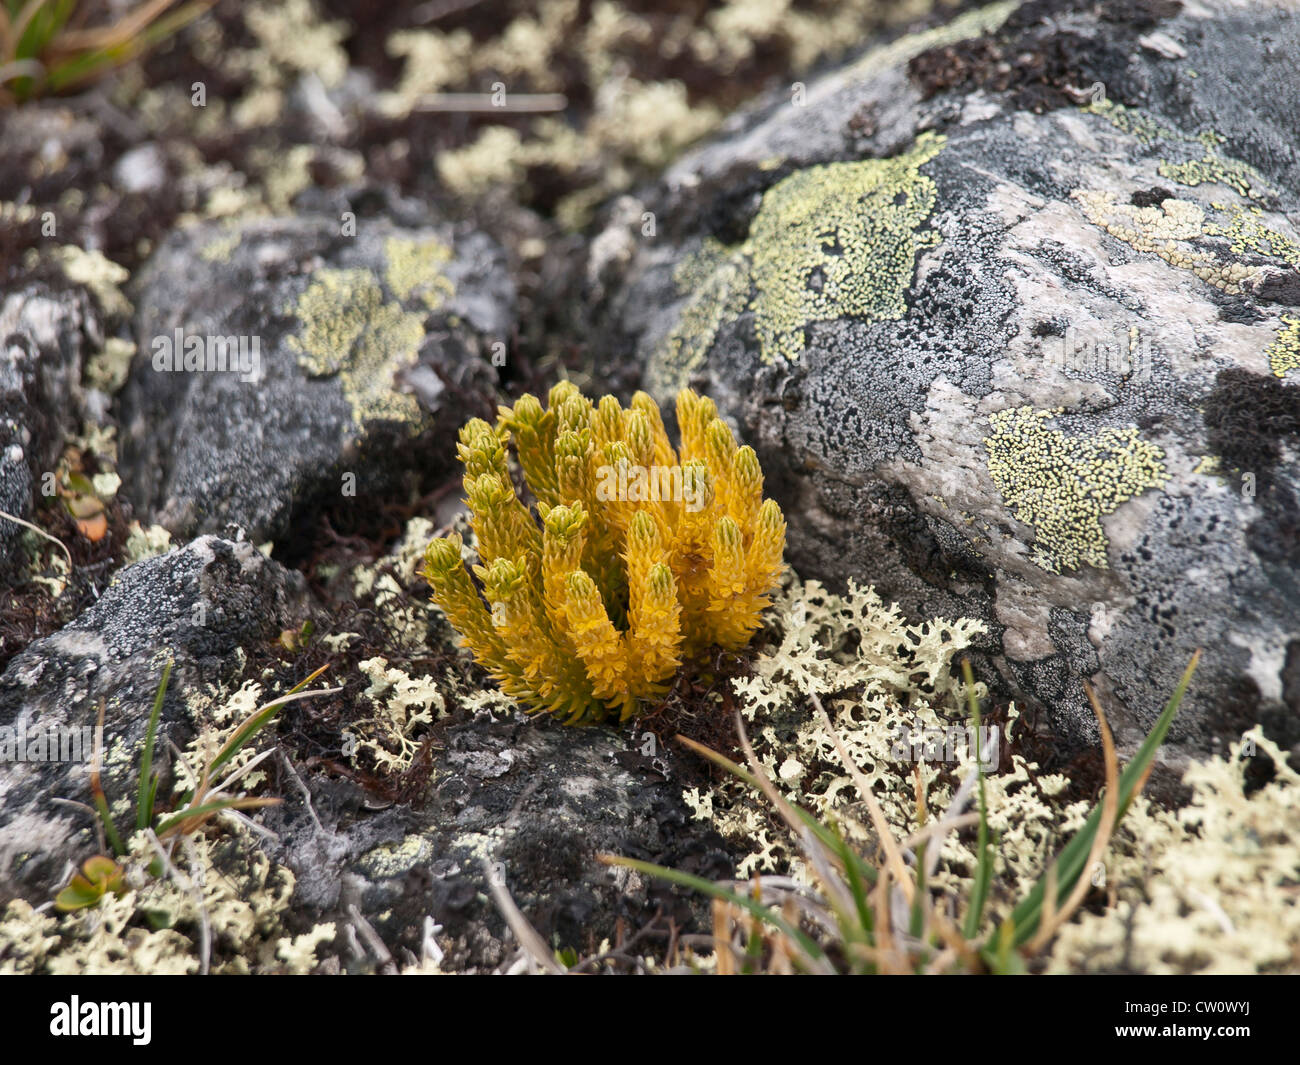 Northern firmoss Huperzia selago surviving at 1500 meter altitude in the Dovrefjell national park Norway Stock Photo